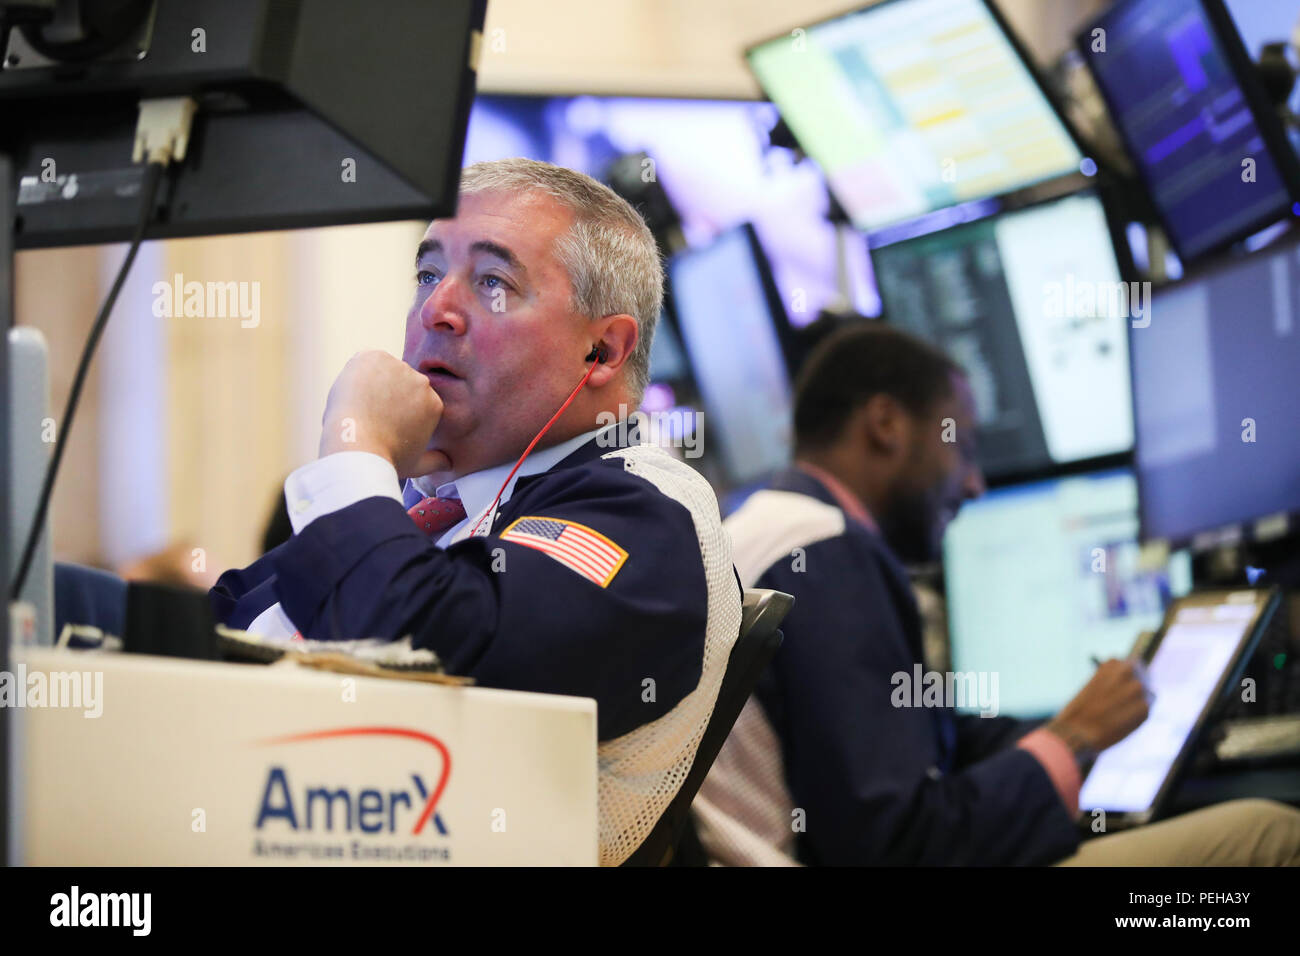 New York, USA. 15th Aug, 2018. Traders work at the New York Stock Exchange in New York, the United States, on Aug. 15, 2018. U.S. stocks closed lower on Wednesday. The Dow Jones Industrial Average fell 137.51 points, or 0.54 percent, to 25,162.41. The S&P 500 was down 21.59 points, or 0.76 percent, to 2,818.37. The Nasdaq Composite Index dropped 96.78 points, or 1.23 percent, to 7,774.12. Credit: Wang Ying/Xinhua/Alamy Live News Stock Photo